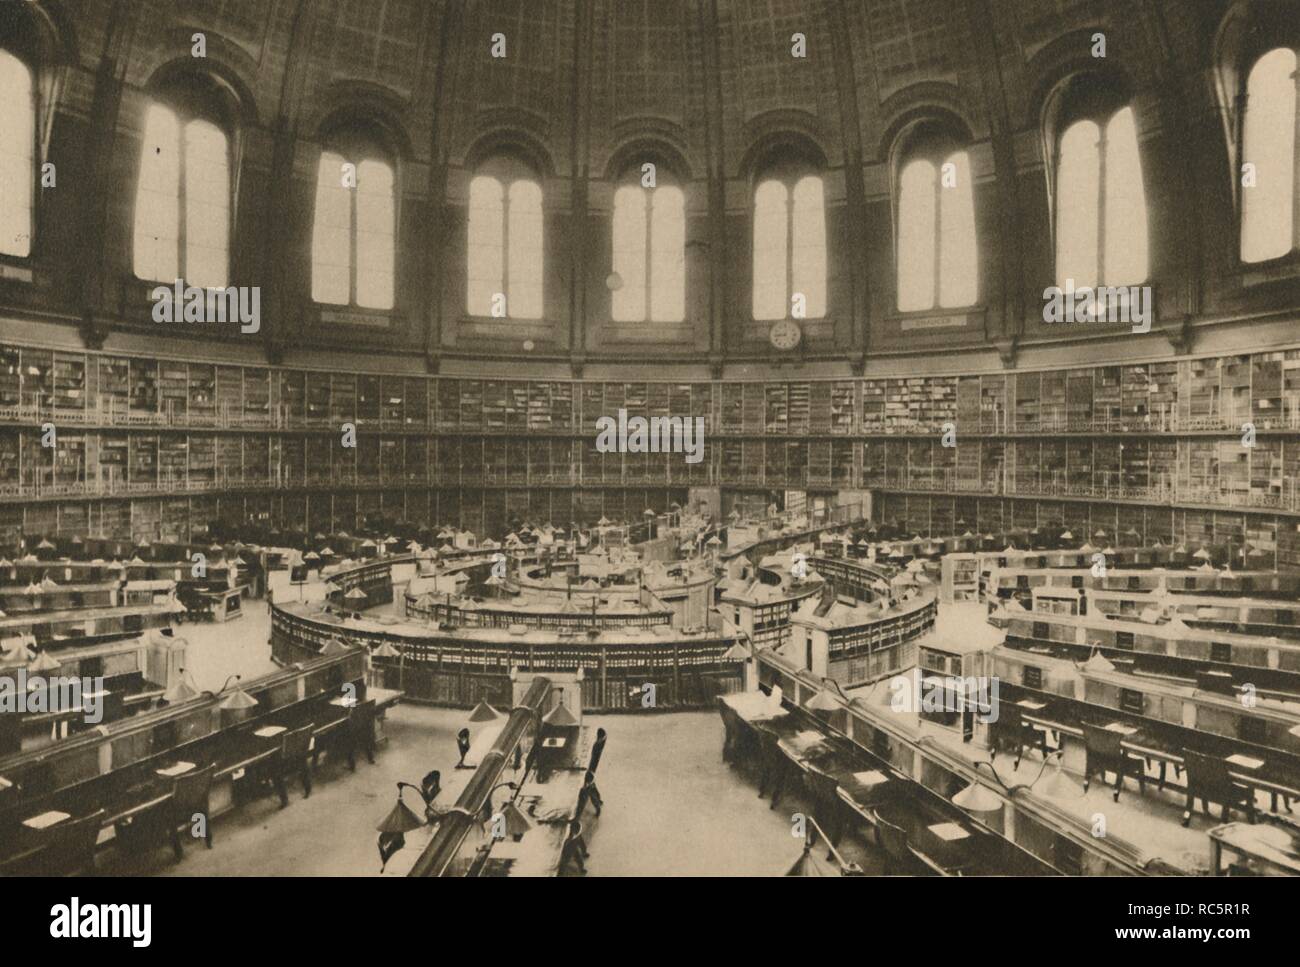 'Reading Room of the Great Library at the British Museum seen from the Entrance', c1935. Creator: Fleming. Stock Photo